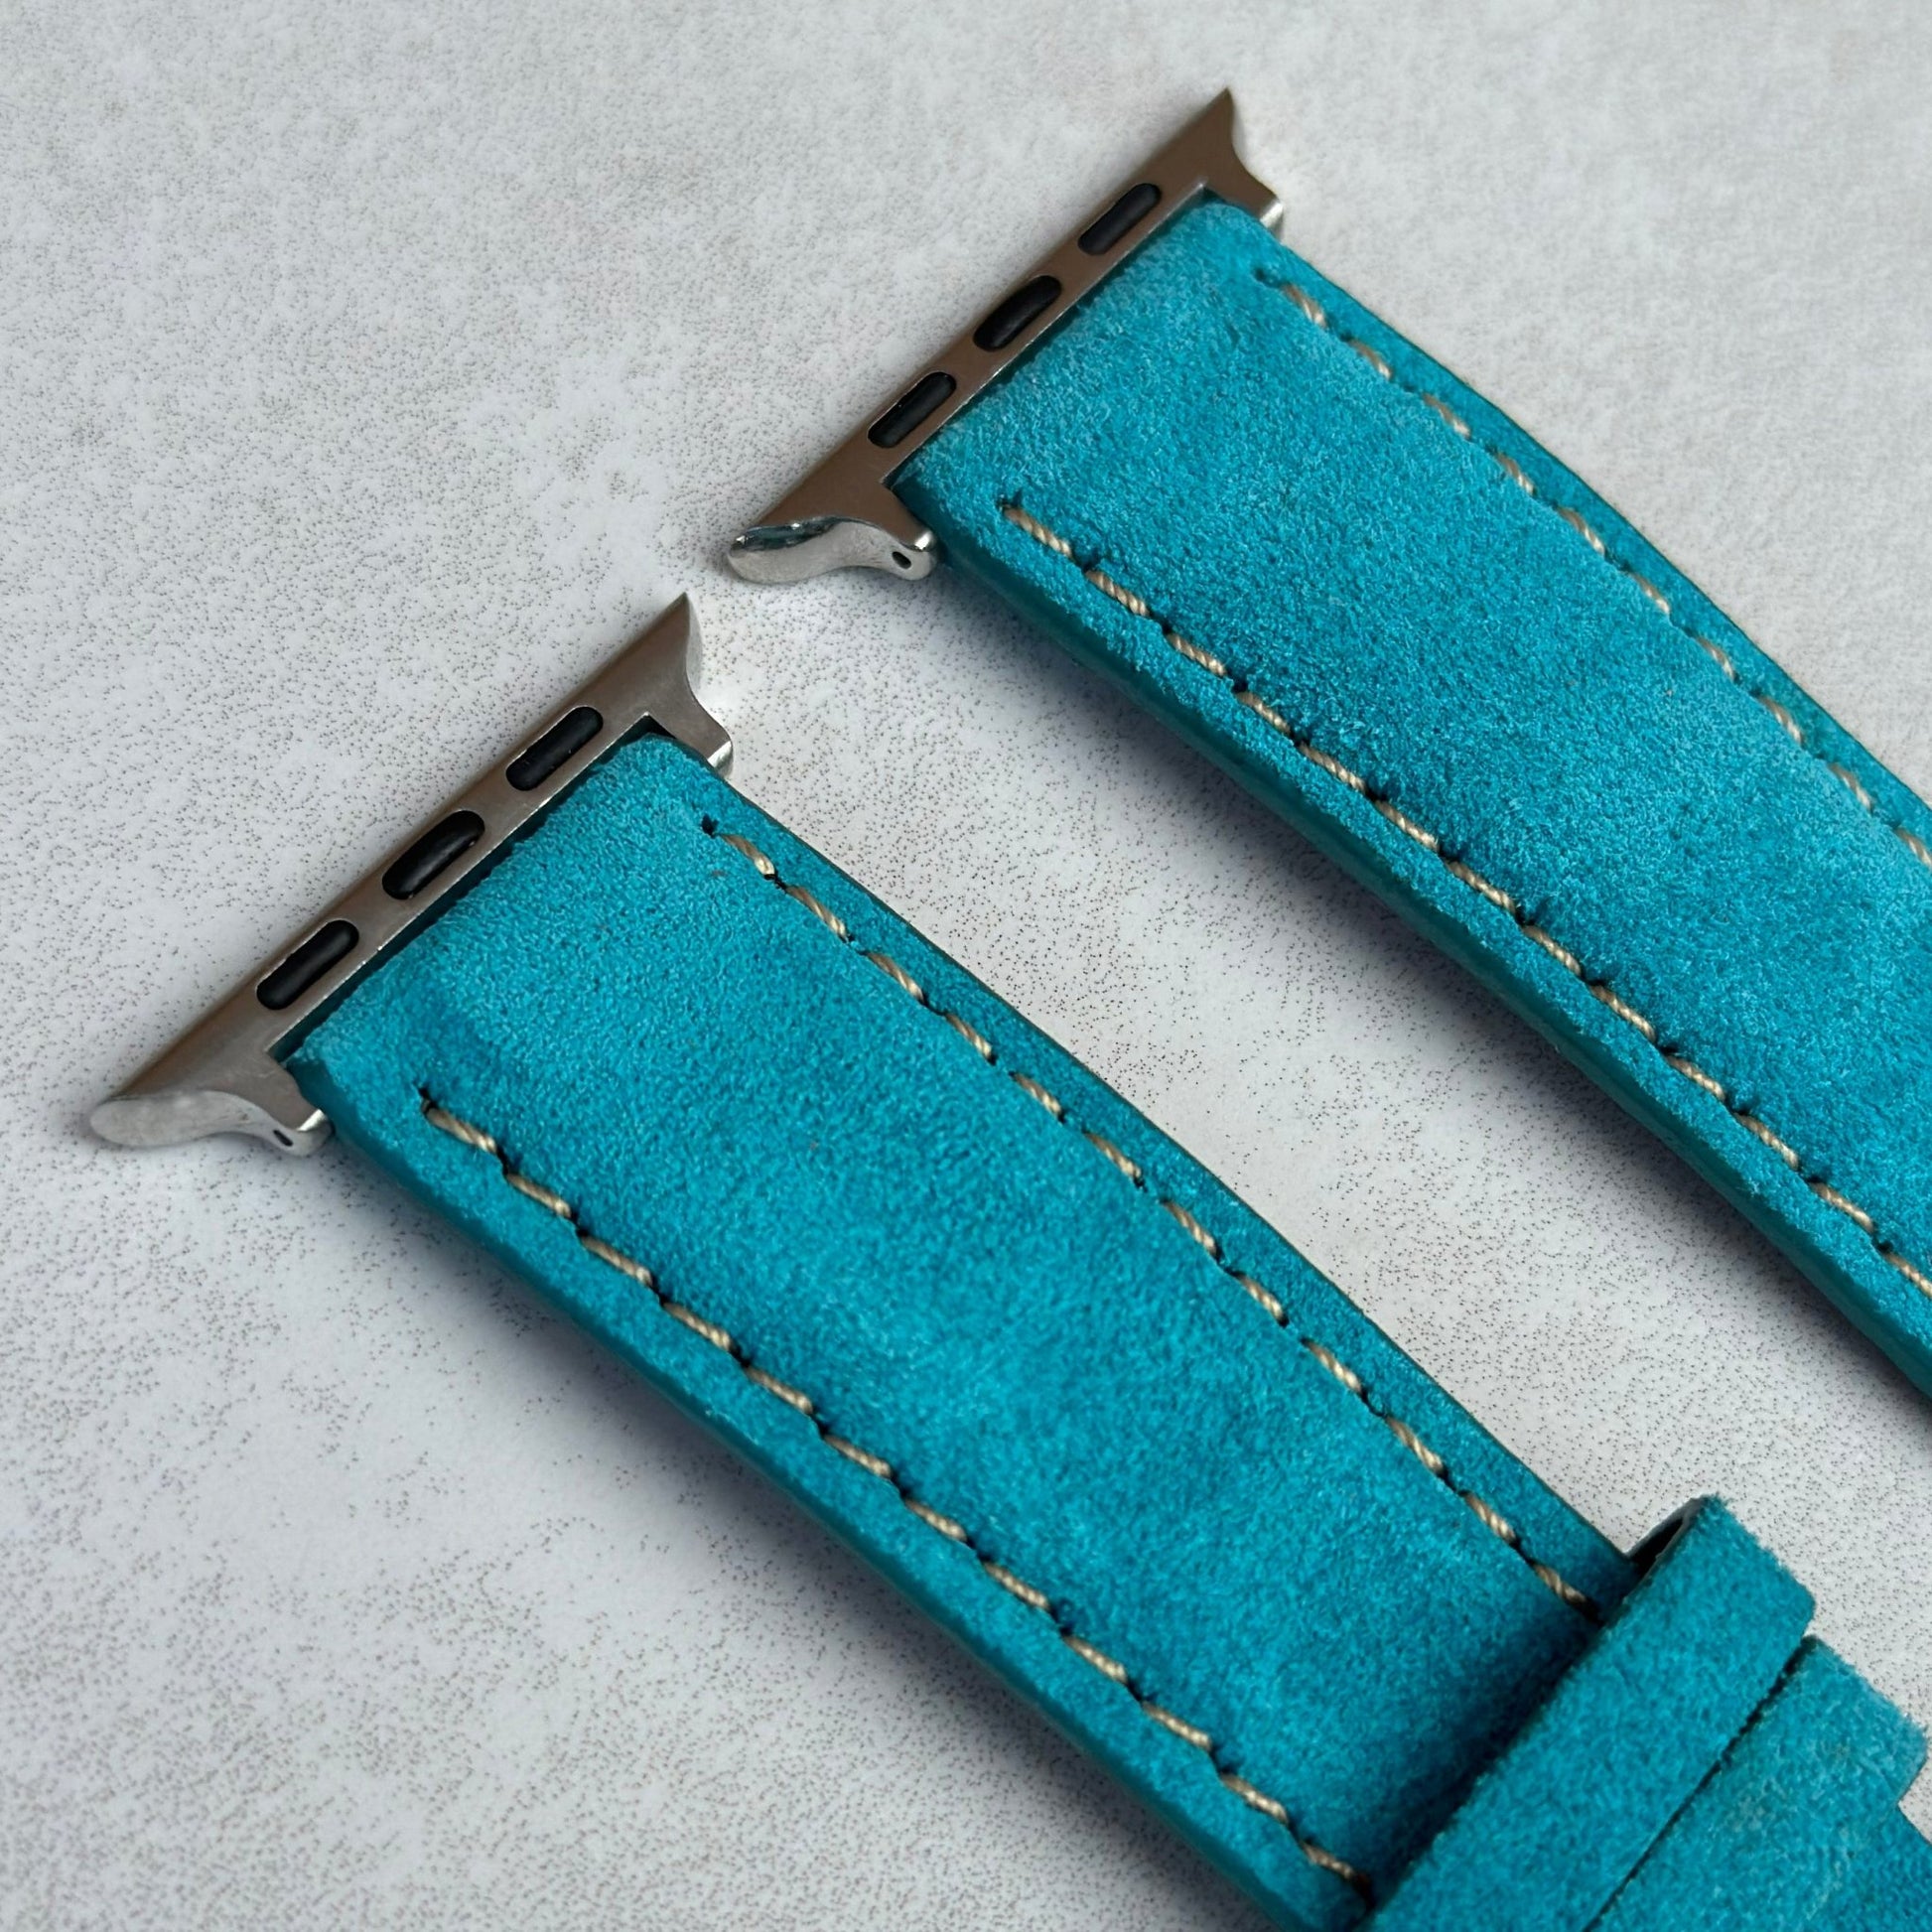 Top of the Paris turquoise suede Apple Watch strap. Ivory stitching. Watch And Strap.